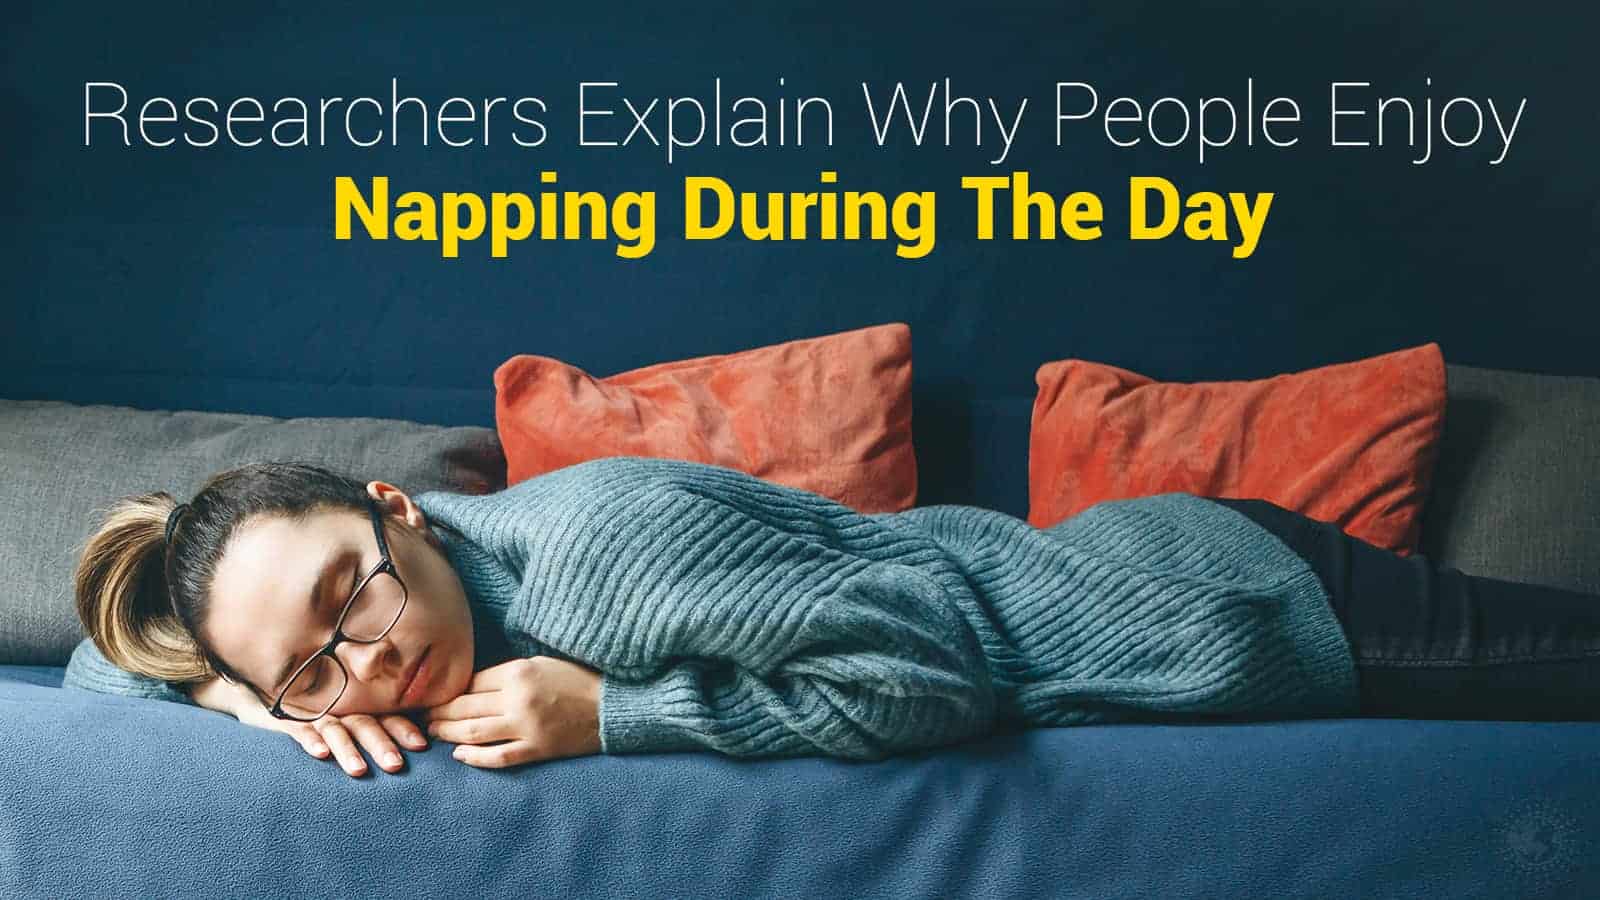 Researchers Explain Why People Enjoy Napping During The Day